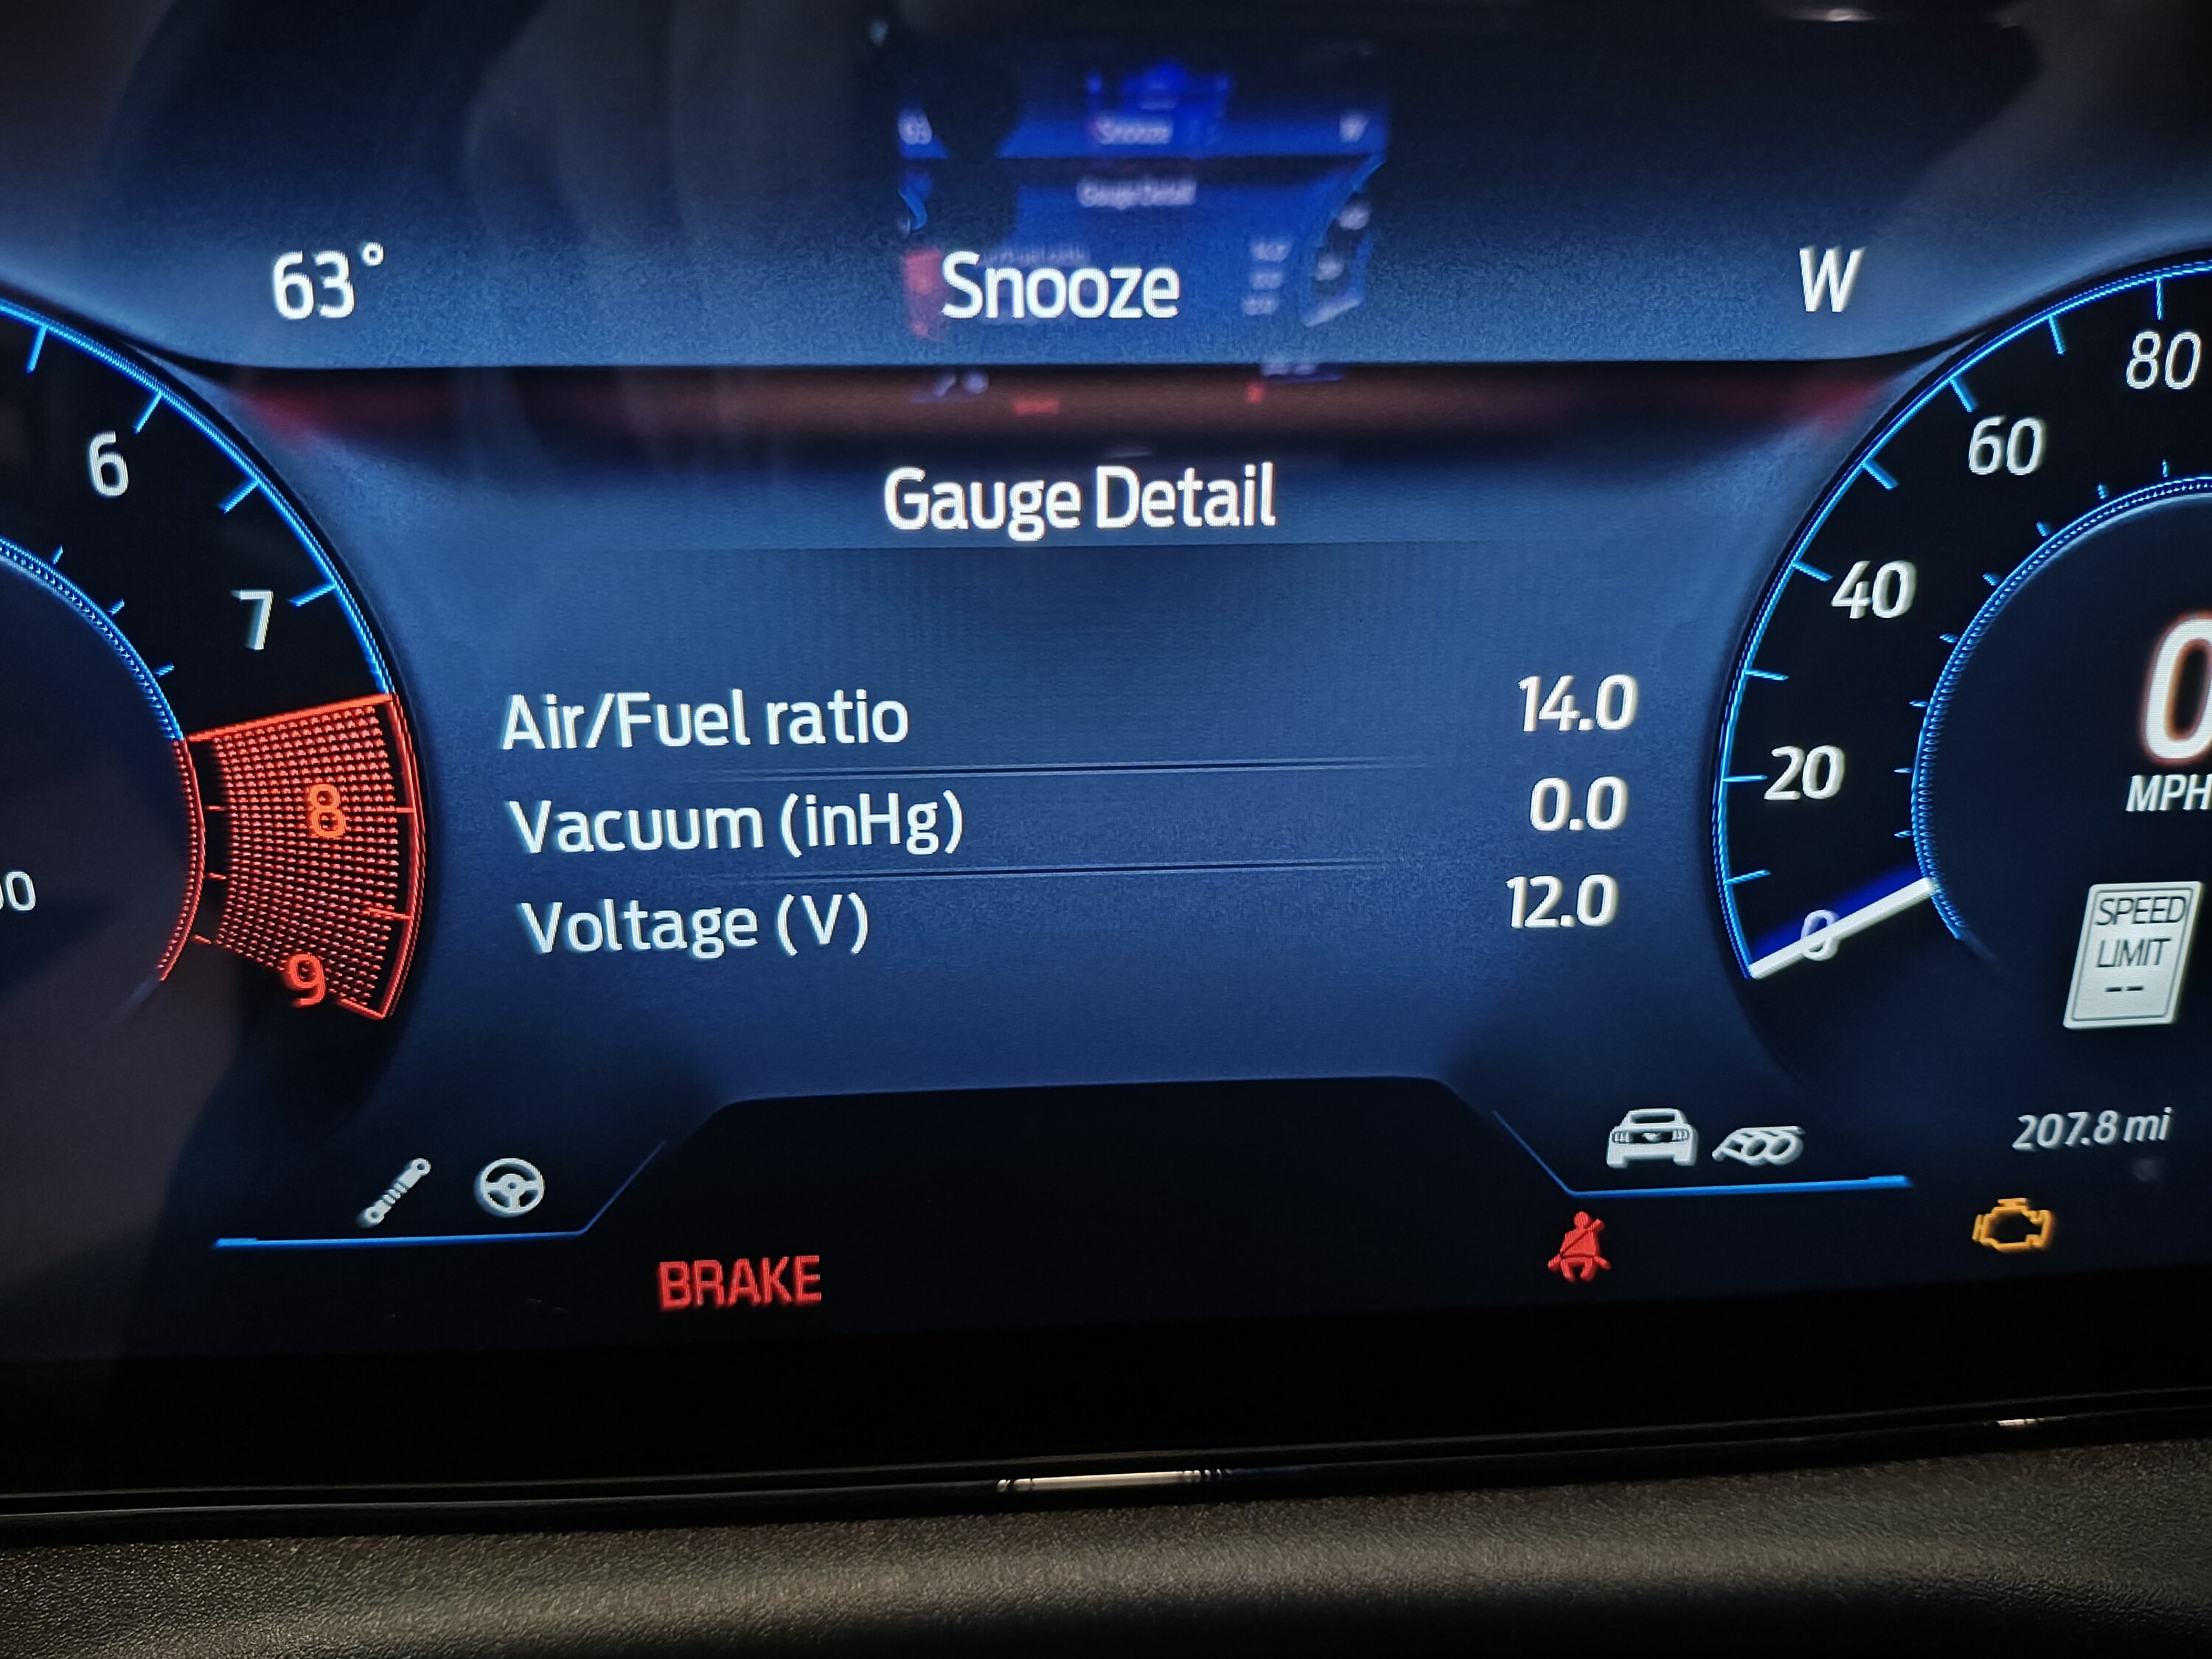 S650 Mustang Battery Voltage on Center Display? IMG_20231119_164030416